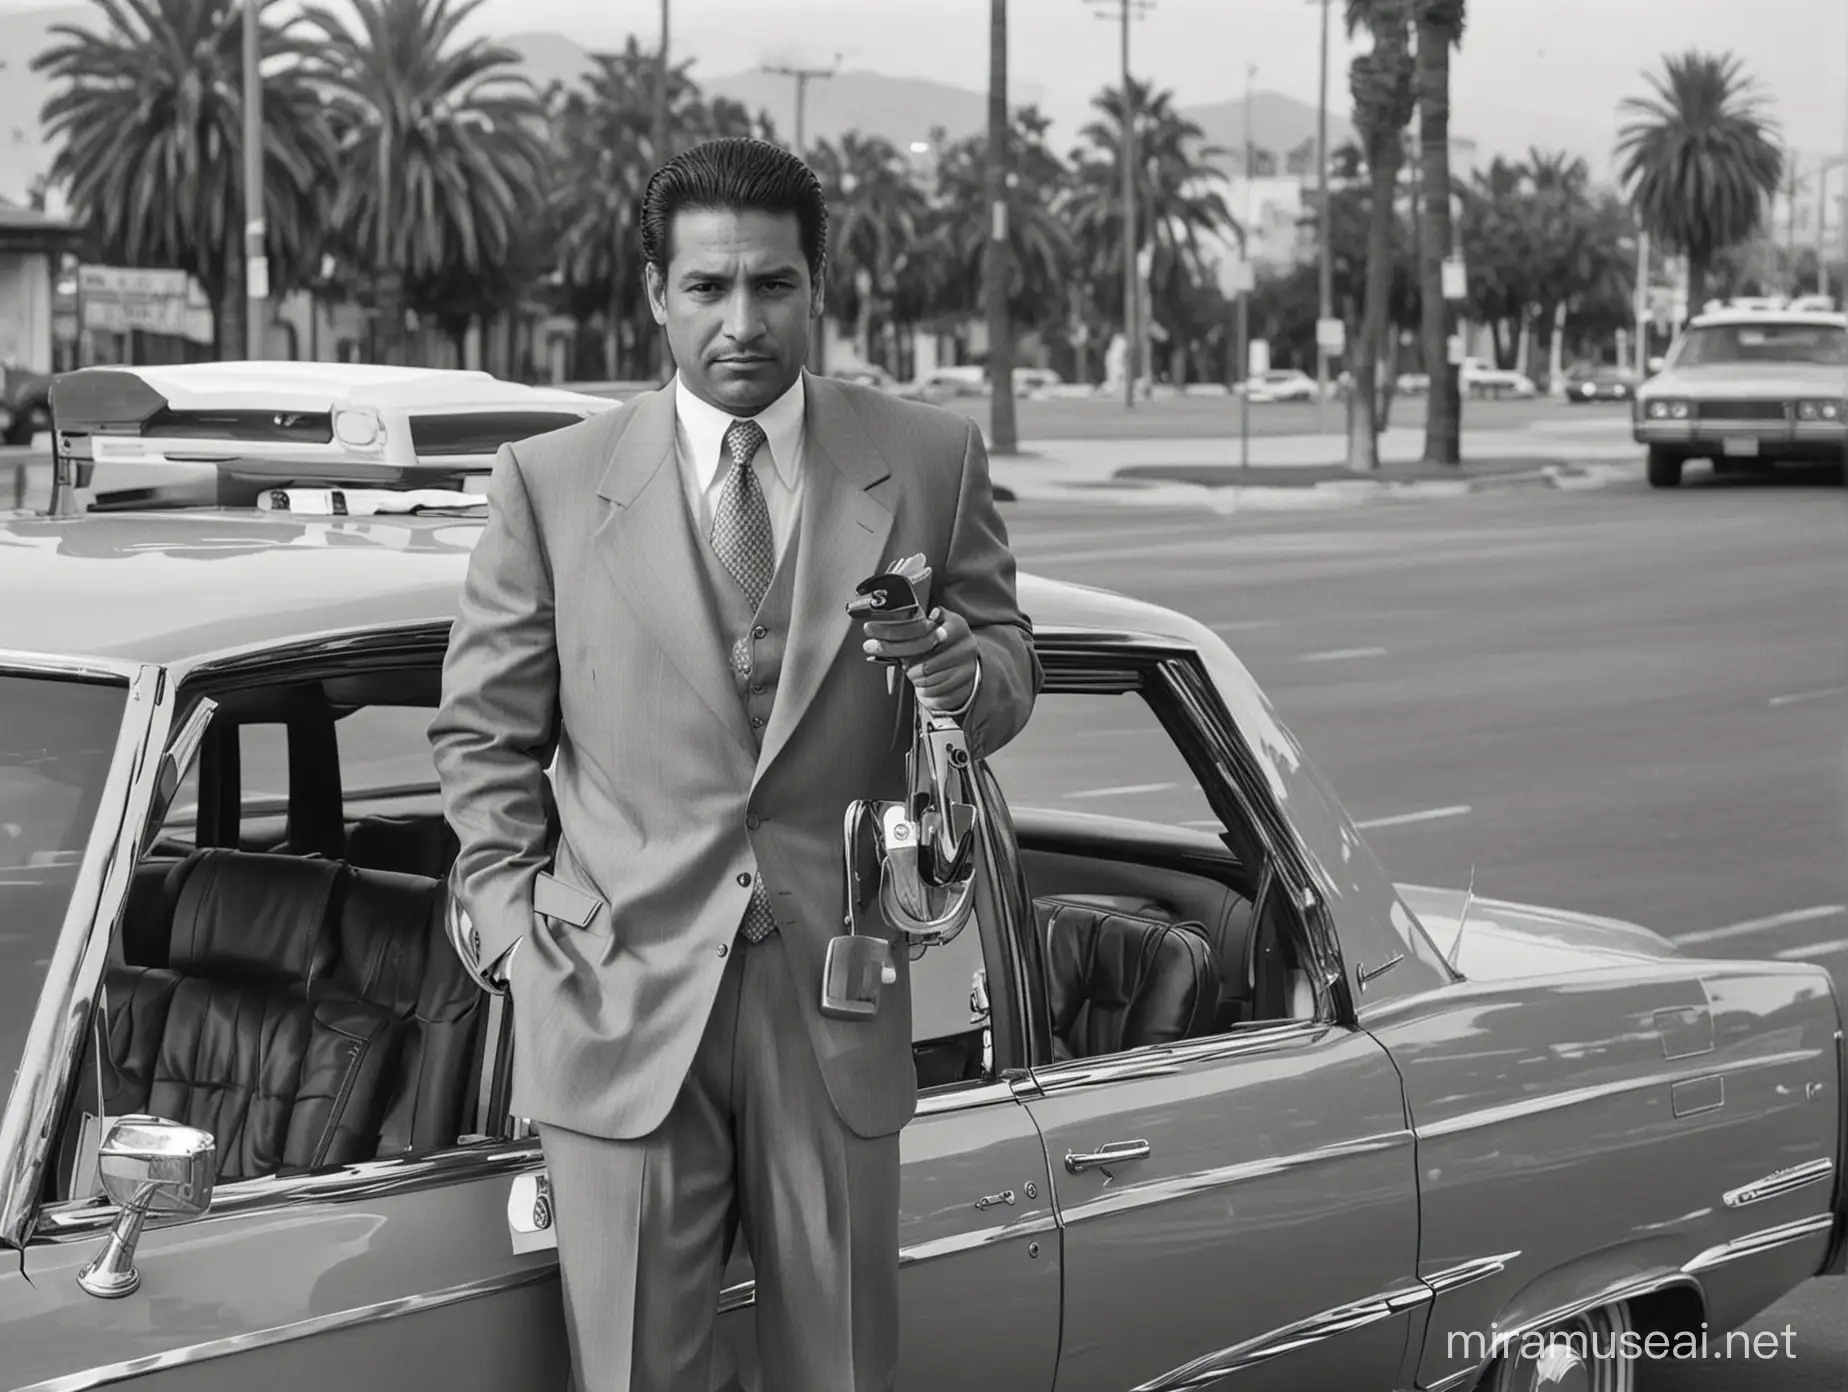 Hispanic Gangster Man Selling Golf Clubs from 1980s Cadillac Sedan in Los Angeles